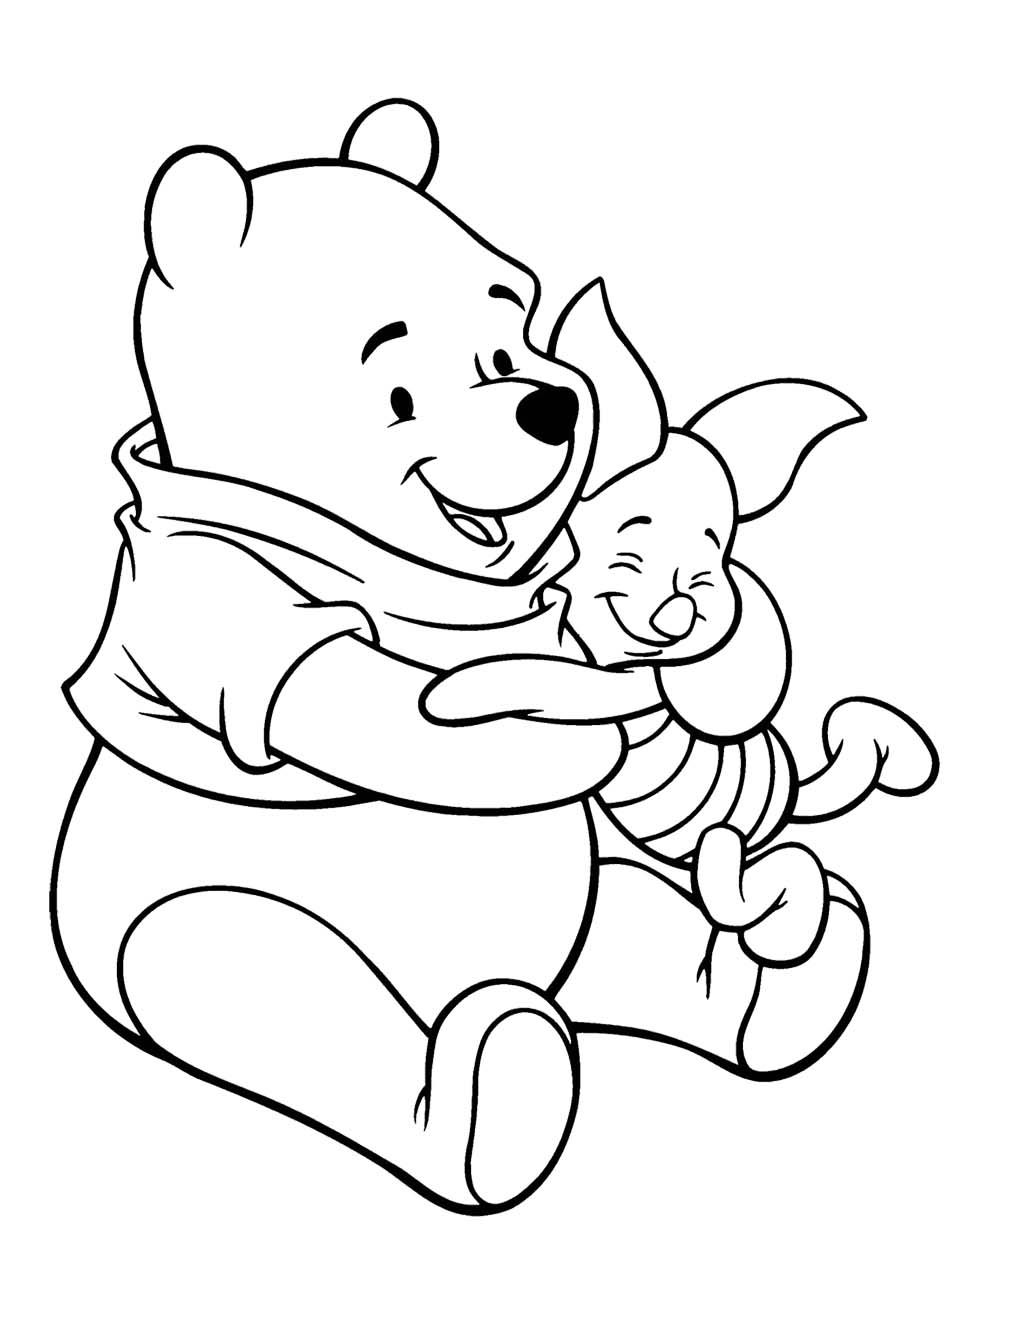 Winnie The Pooh Care With Piglet Coloring Page | Pooh Bear ...